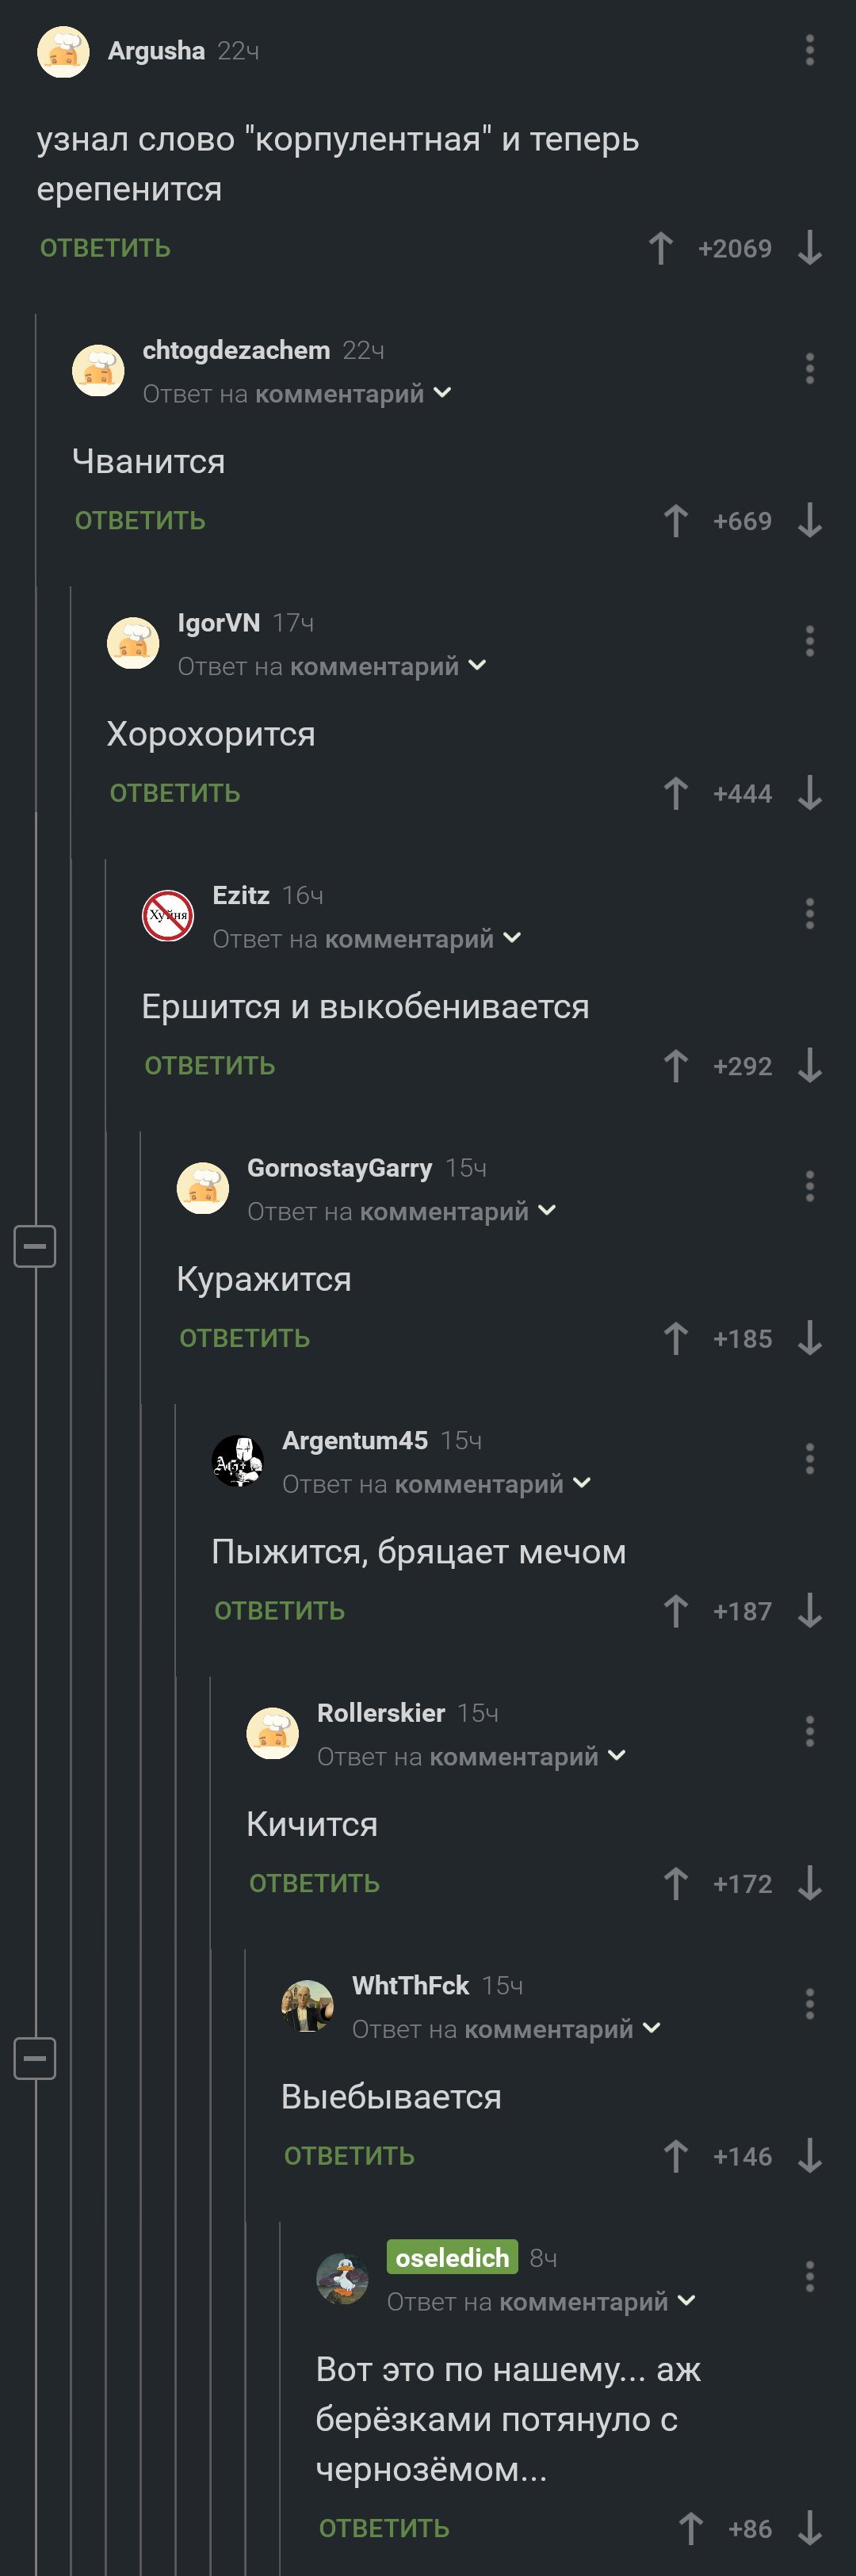 Synonymous duel - Screenshot, Comments, Comments on Peekaboo, Humor, Word game, Synonym, Old East Slavic, Literature, Longpost, Mat